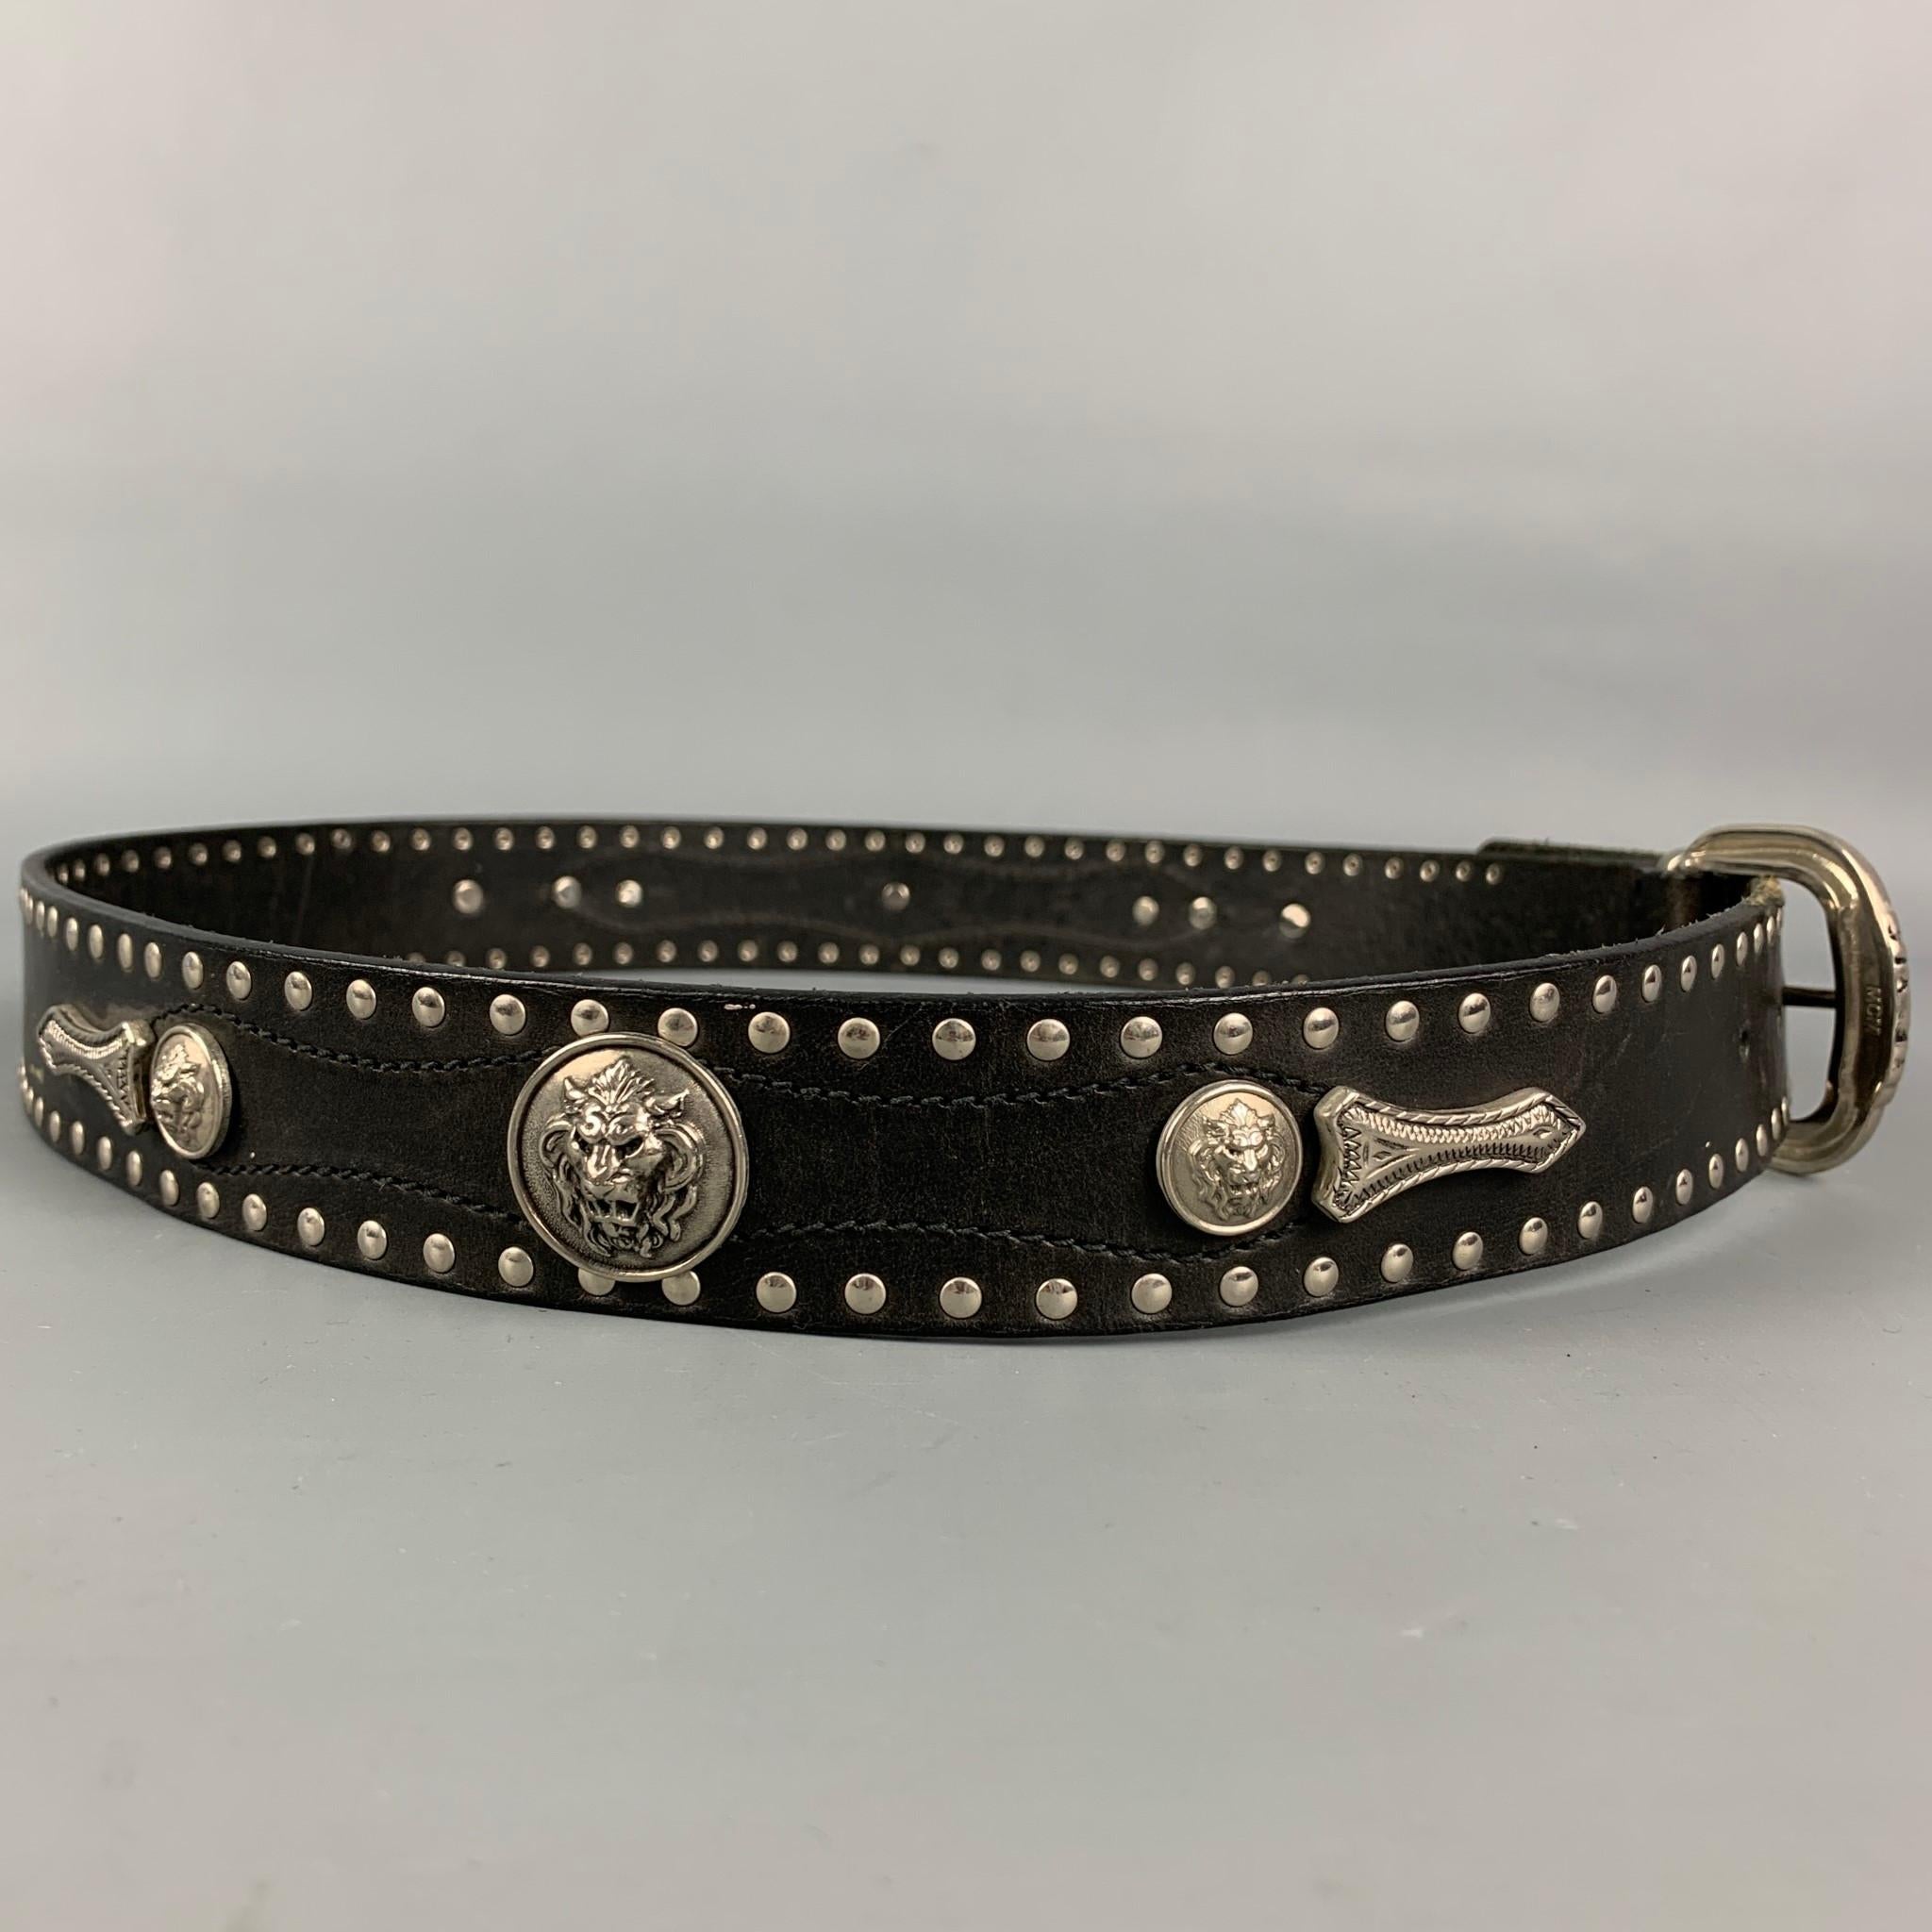 Vintage VERSACE by GIANNI VERSACE belt comes in a black leather with a studded design throughout featuring lion head details and a buckle closure. Made in Italy.

Good Pre-Owned Condition.
Marked: 95/38

Length: 44.5 in.
Width: 1.25 in.
Fits: 35 in.